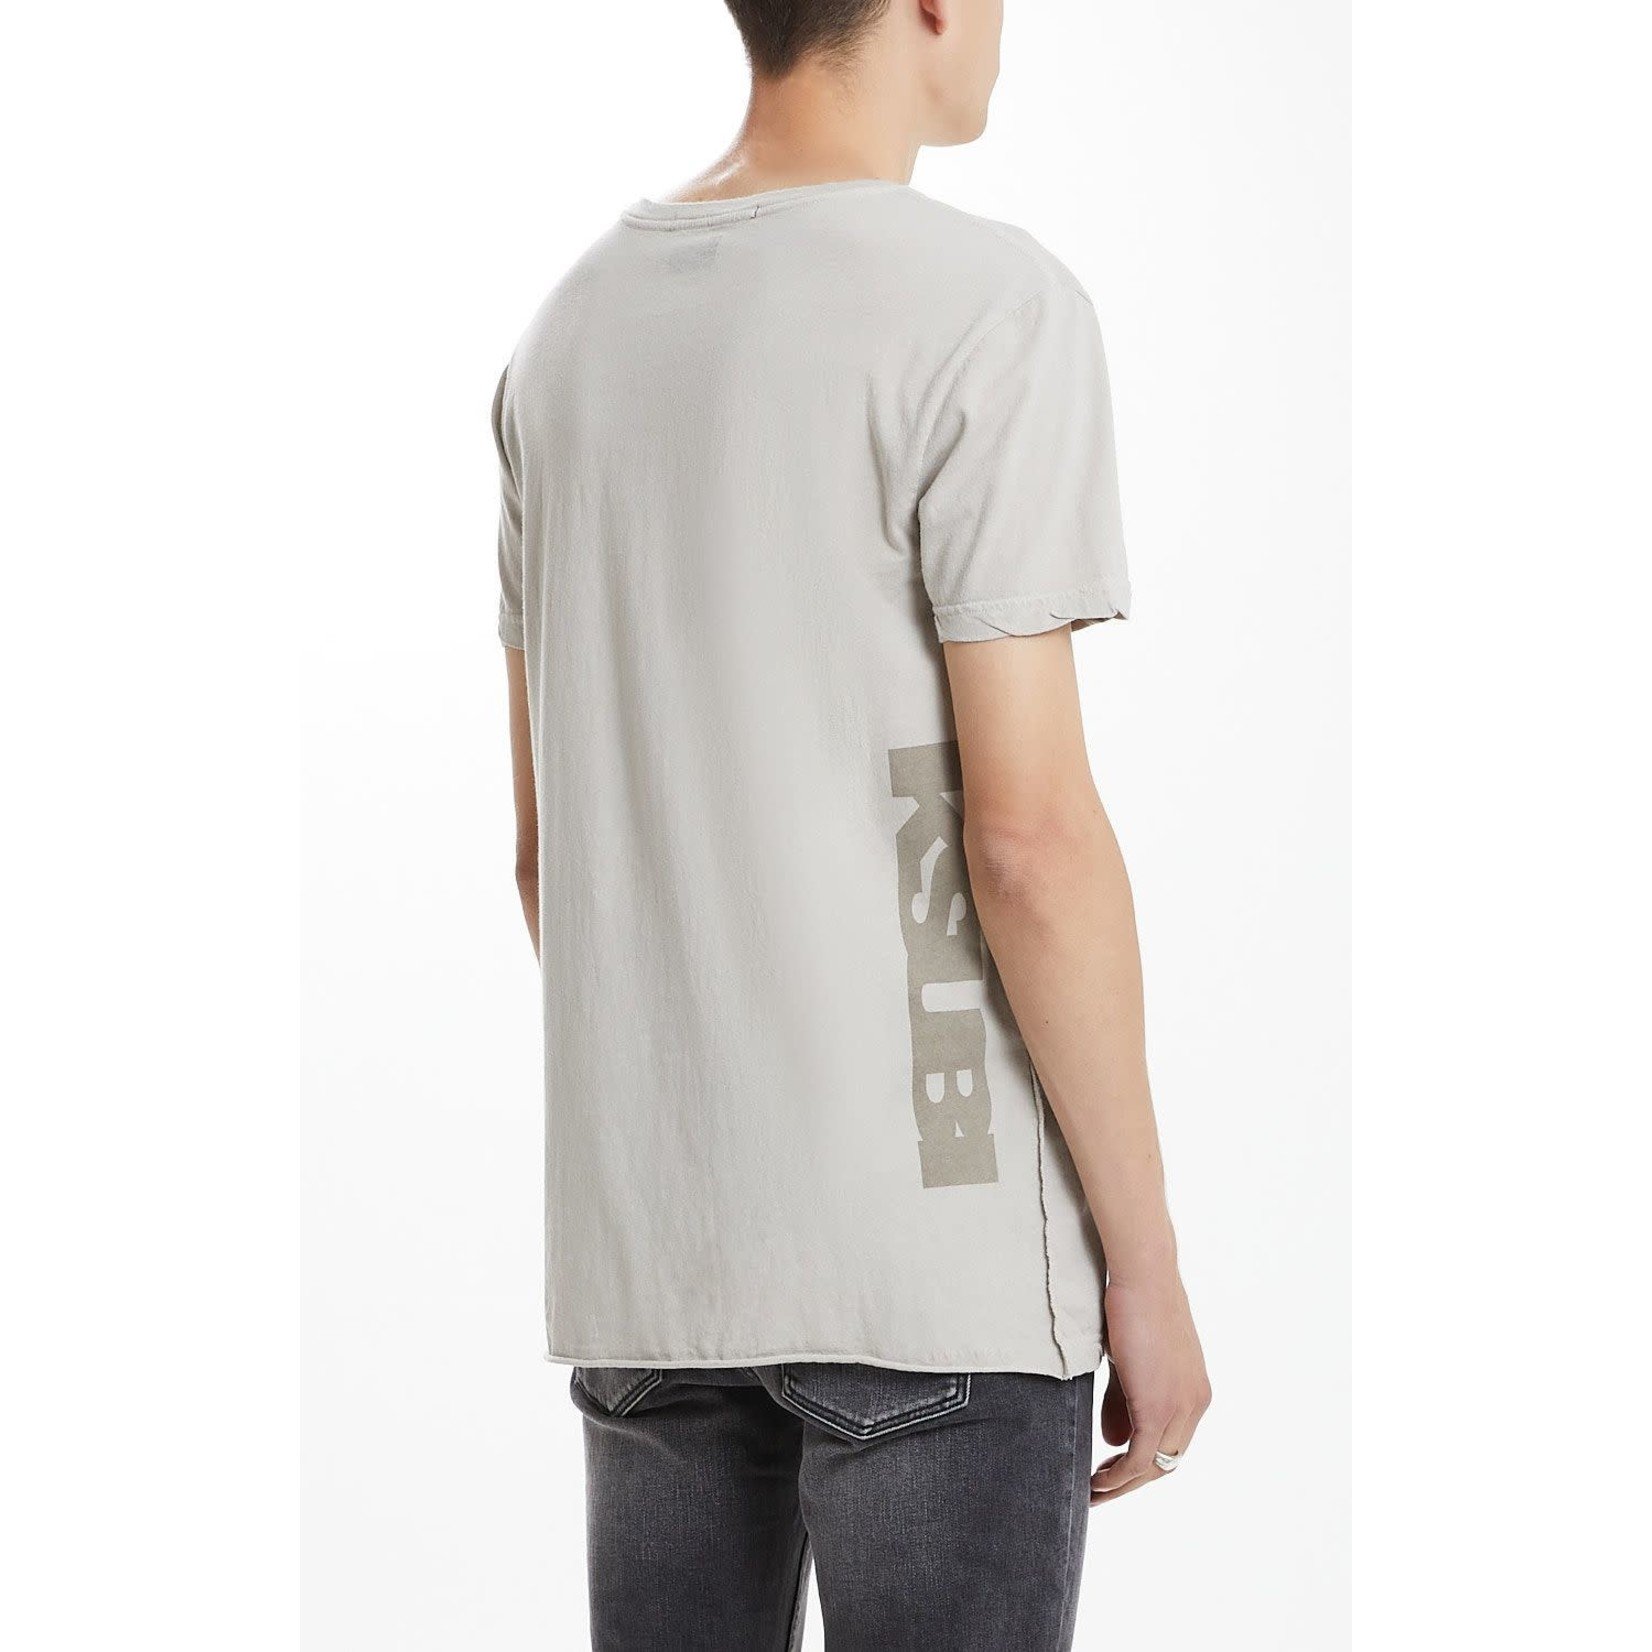 Ksubi Sign of the Times Seeing Lines SS Tee